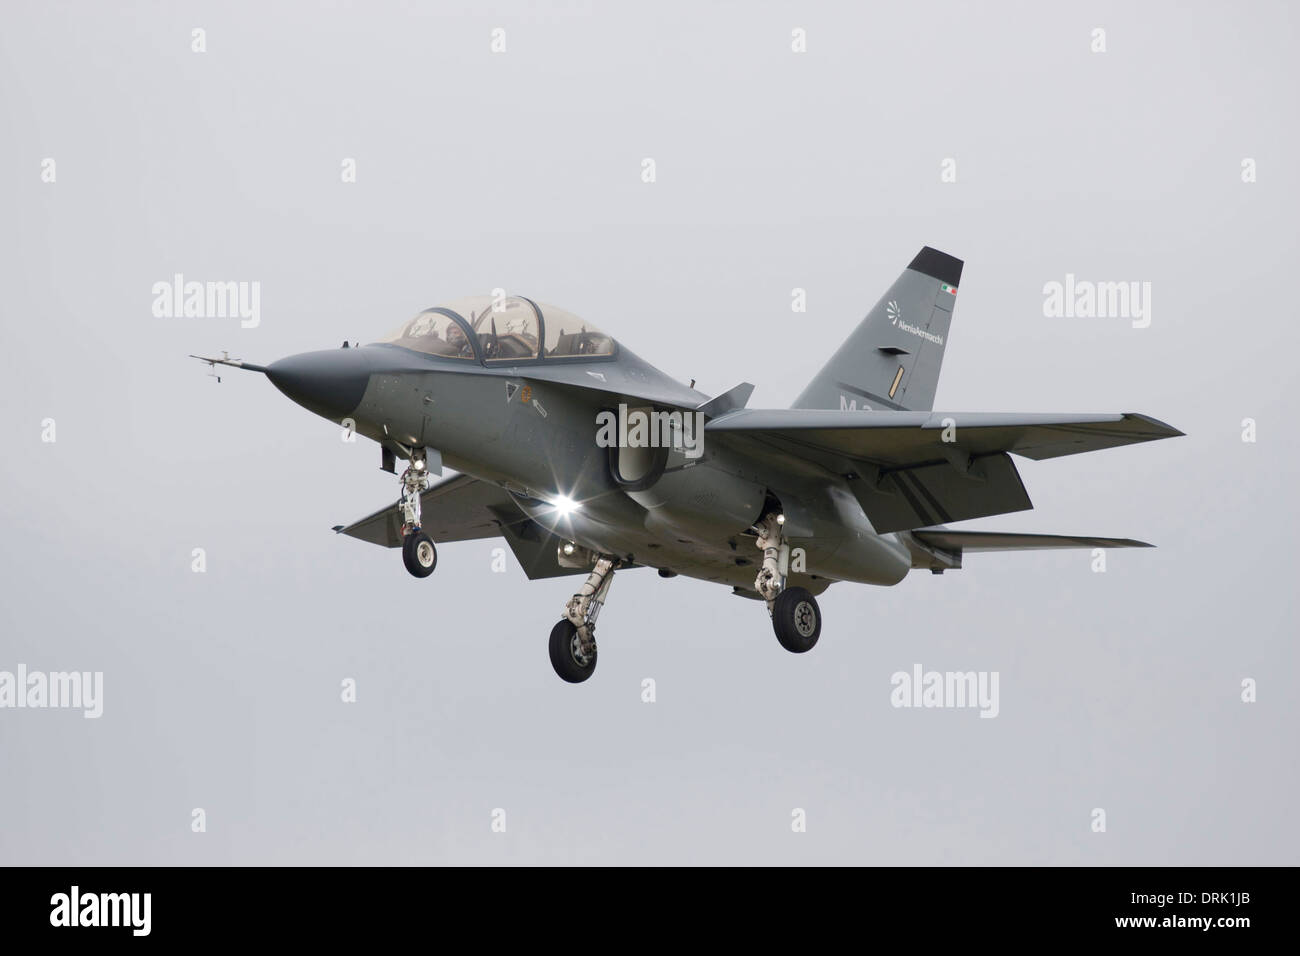 military 'jet airplane' on  landing finals at airport in england with wheels and flap down against clear neutral sky background Stock Photo